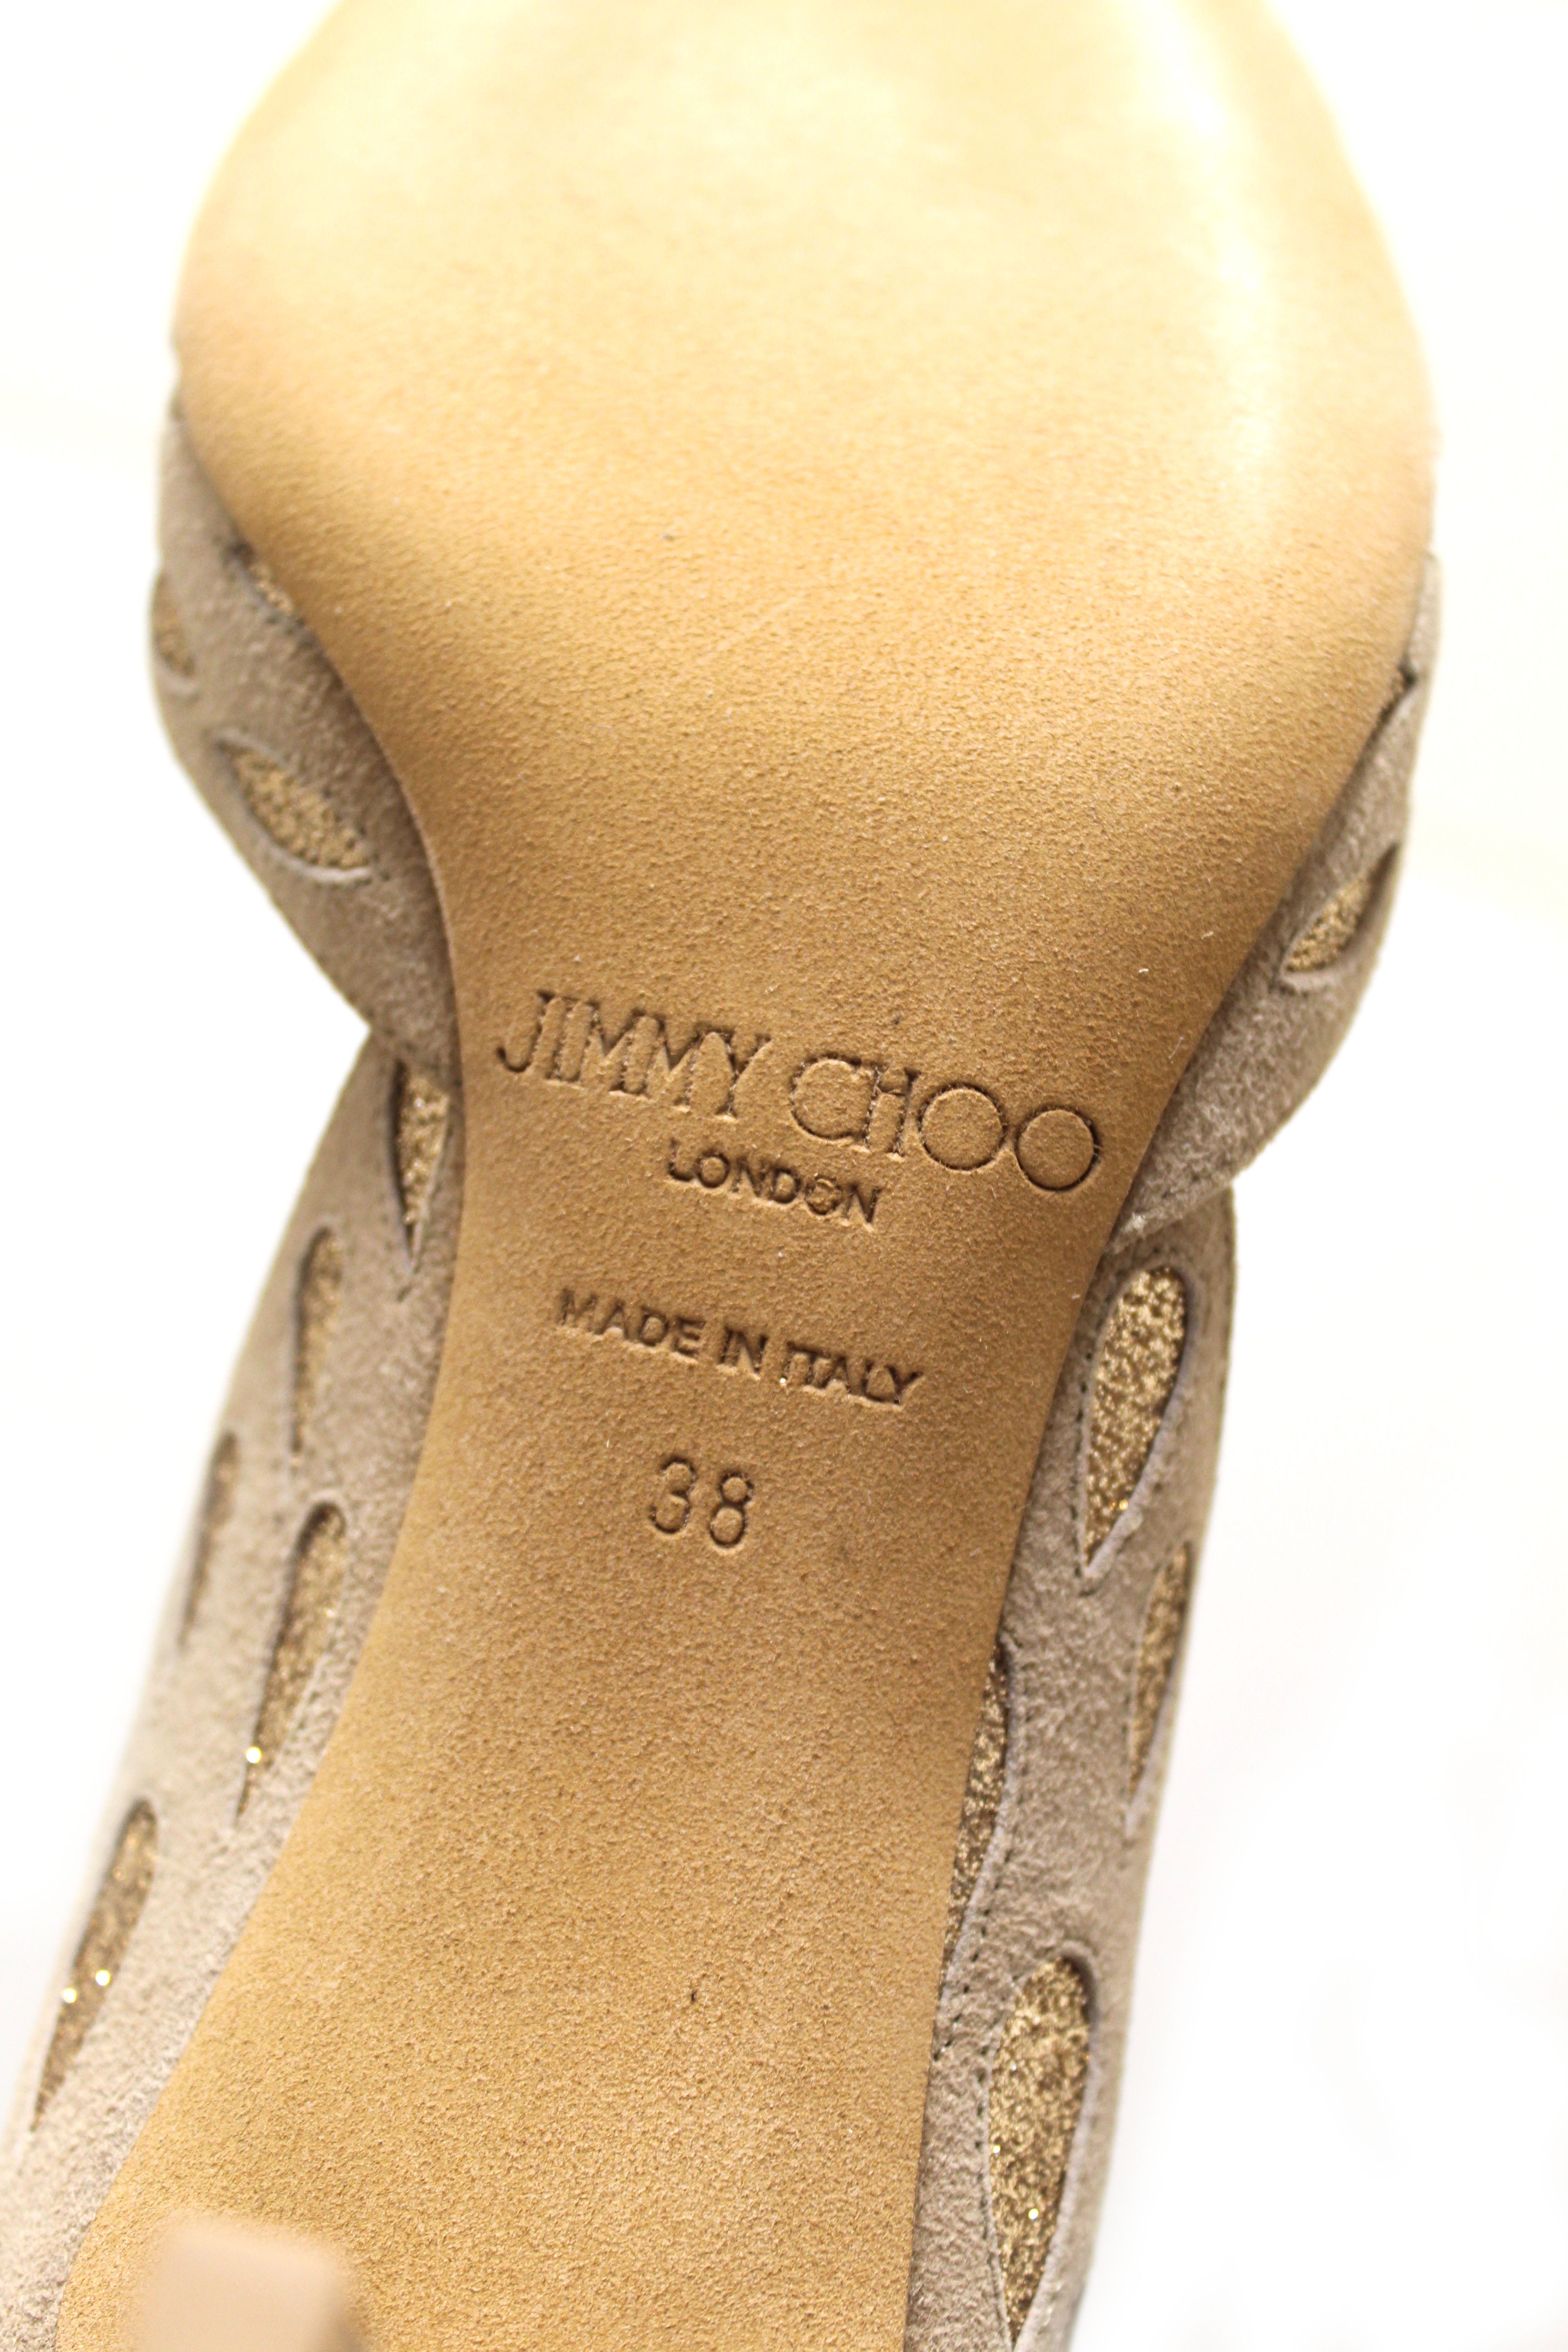 NEW Authentic Jimmy Choo Nude Suede Daysha 65 Heel Shoes Size 38